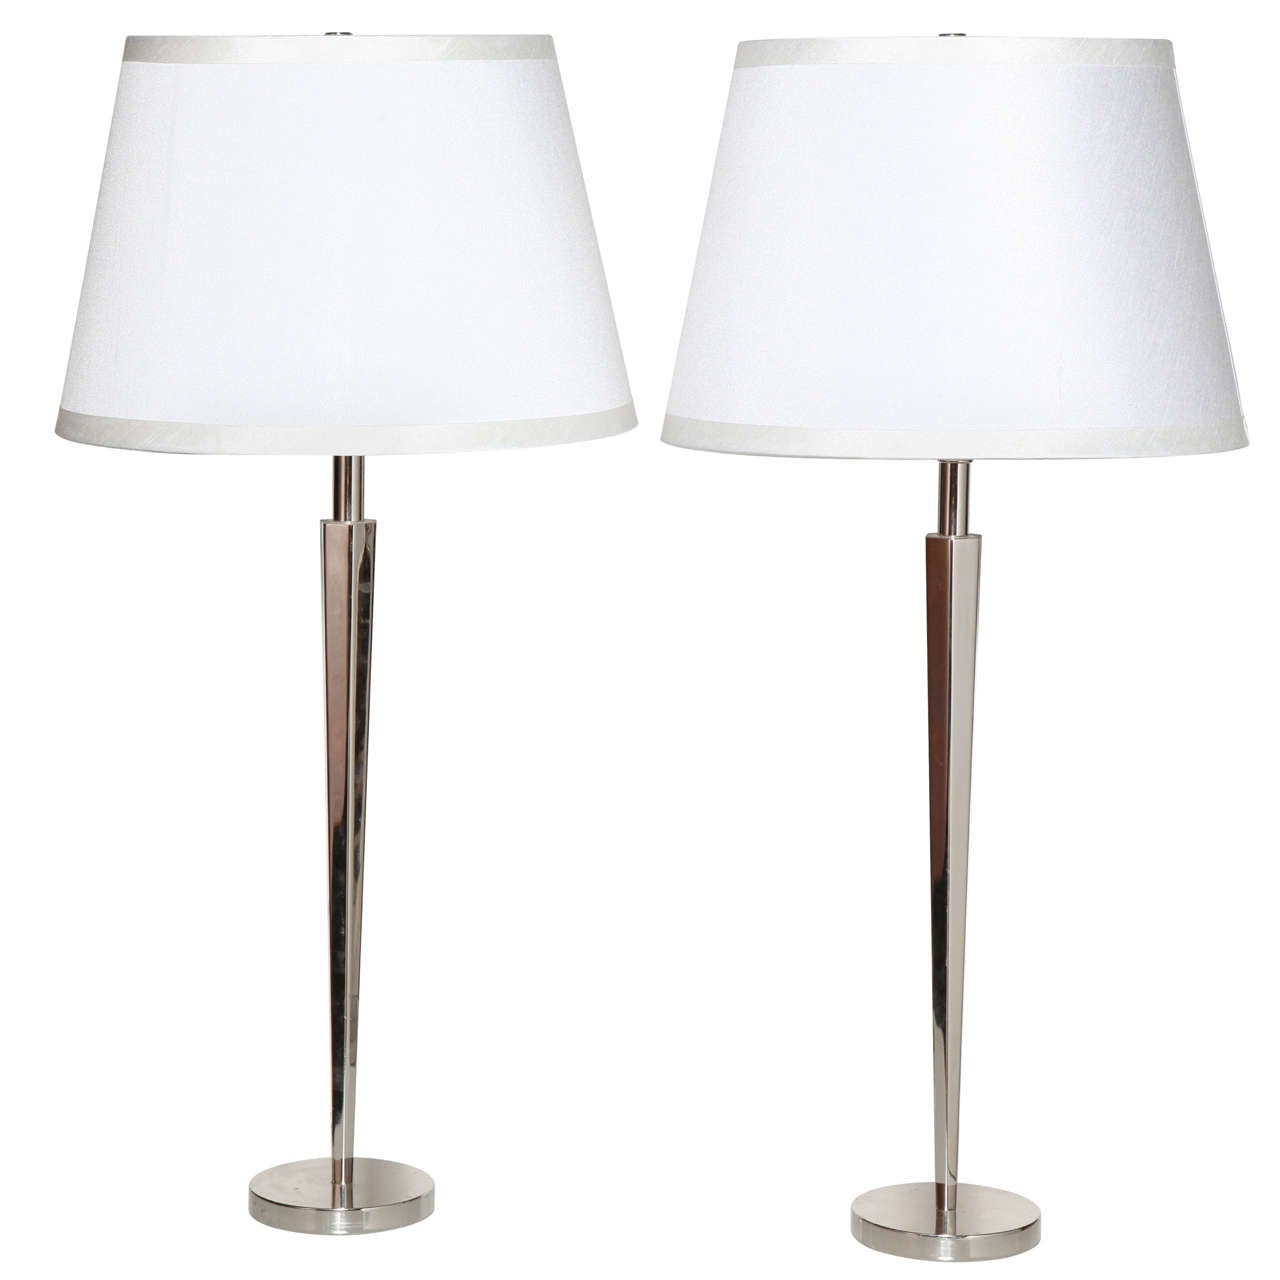 Pair of Barbara Barry Polished Nickel "Pacific Heights" Candlestick Table Lamps 